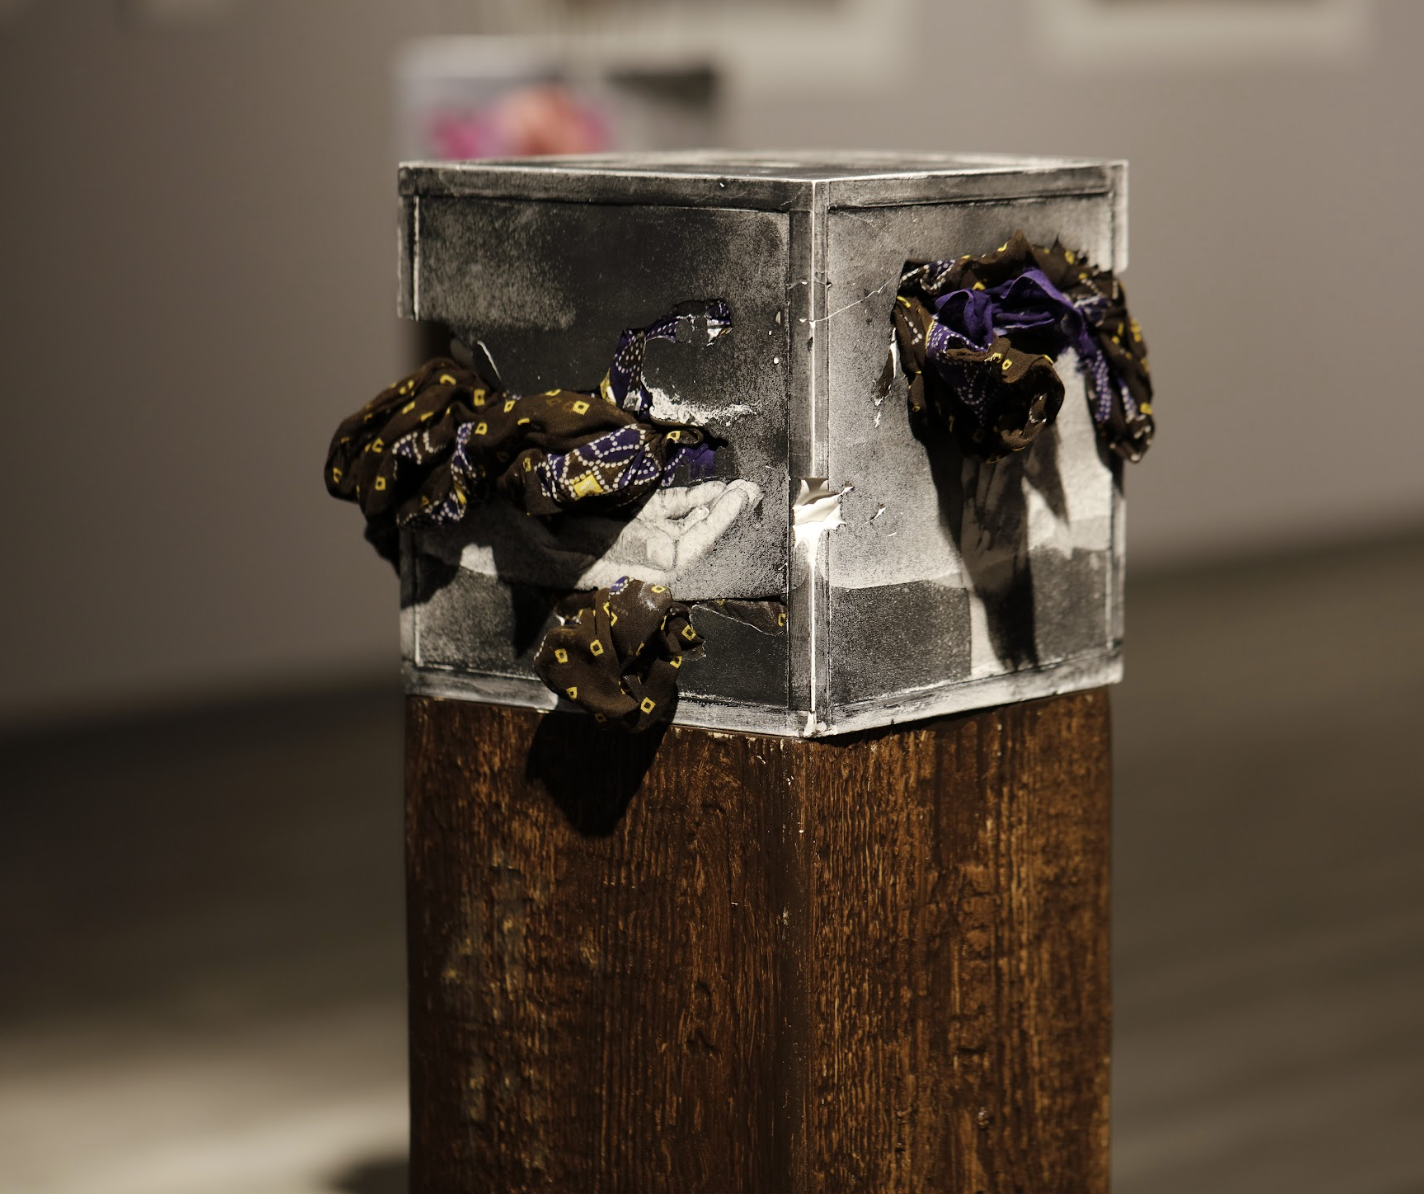 Image: Nirmal Raja, Contained III, 2017. Collagraphs on cast white plaster, sari fabric. A metallic colored cube upon a wooden plinth, the corners of the plinth and the cube flush. On two sides of the cube, black and purple fabric bursts out. Image courtesy of the South Asia Institute.